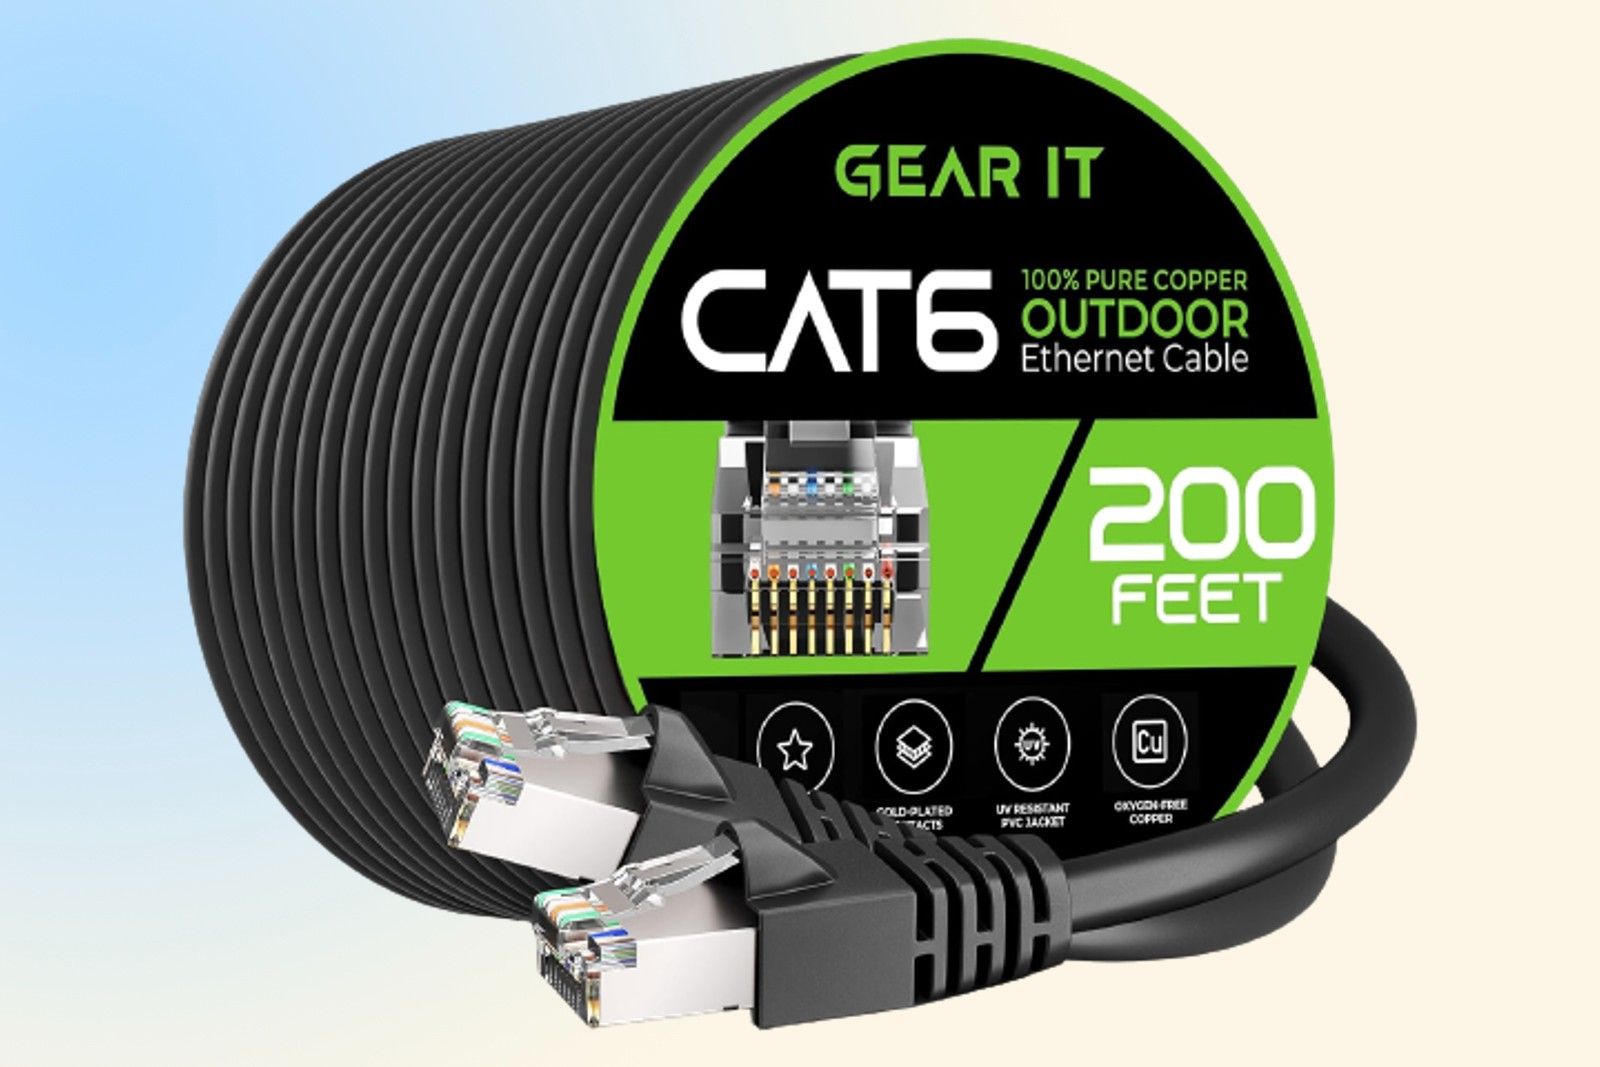 GearIT Cat6 Outdoor Ethernet Cable (200ft)